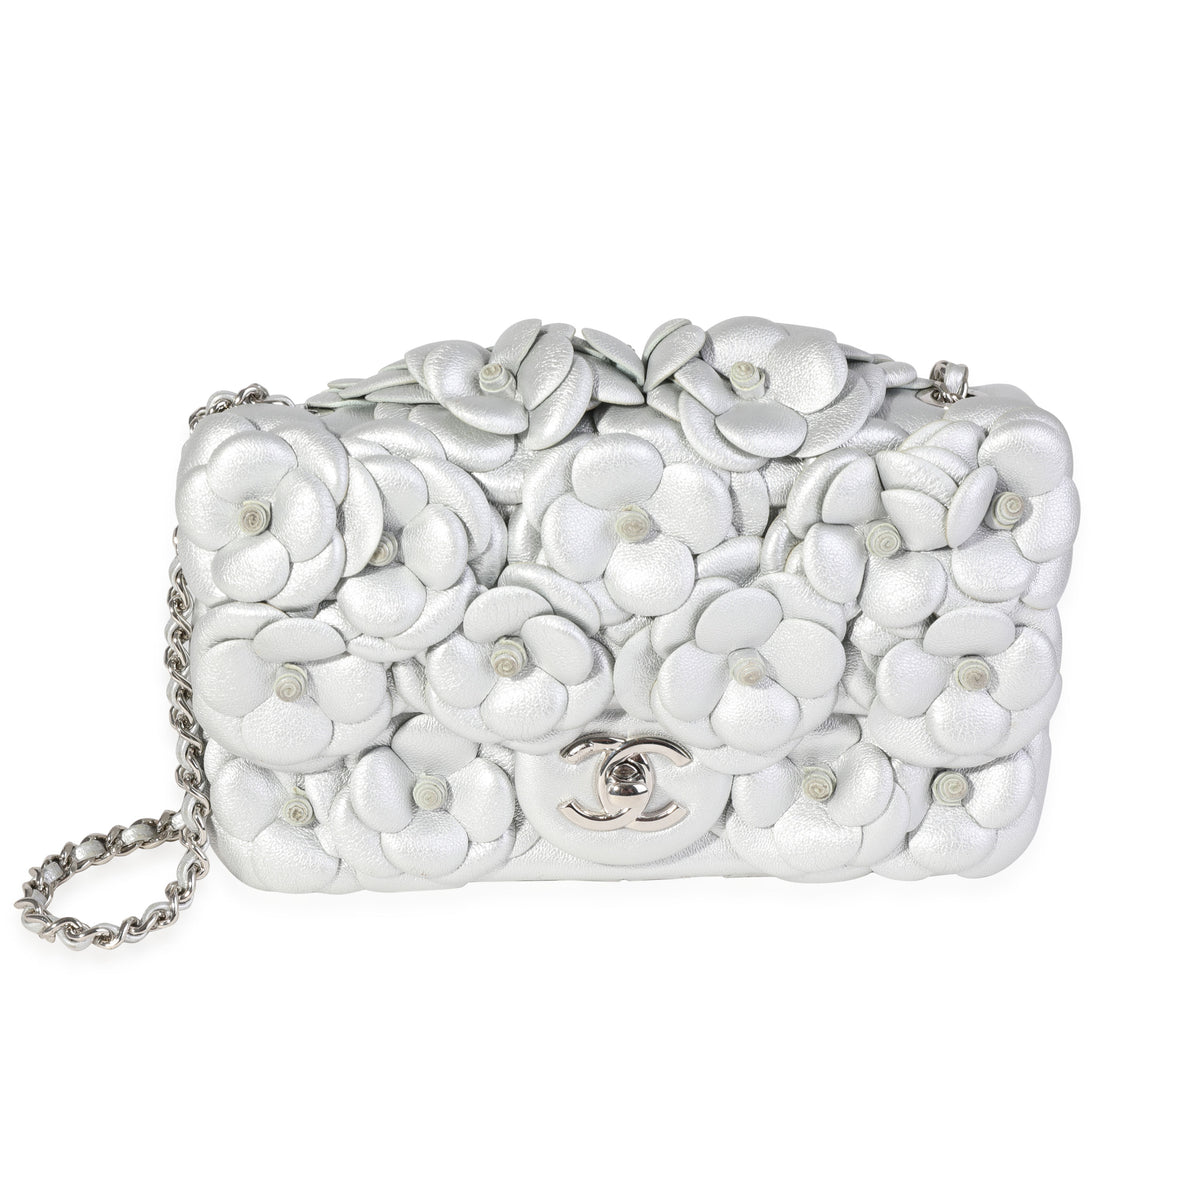 Chanel Silver Quilted Leather Camellia Mini Rectangular Flap Bag, myGemma